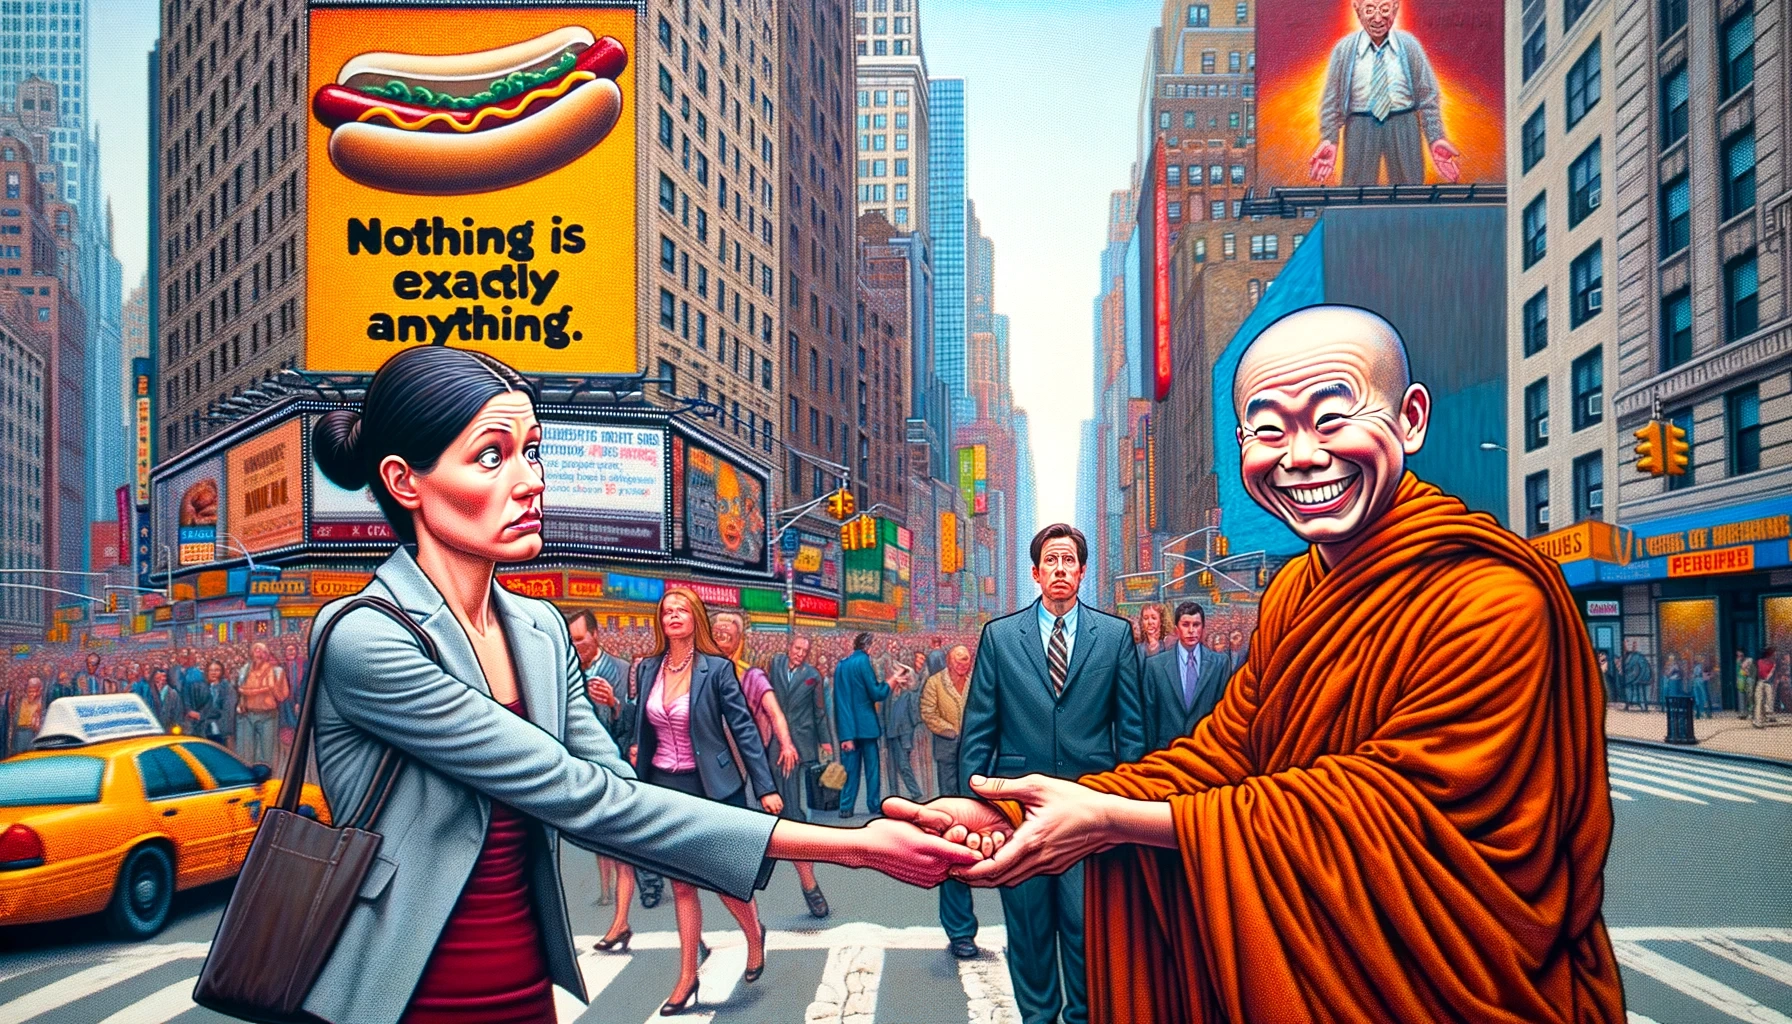 An illustration of a grinning Tibetan monk handing something to a befuddled young woman in the middle of Times Square. The phrase “Nothing is exactly anything” is visible on a billboard.